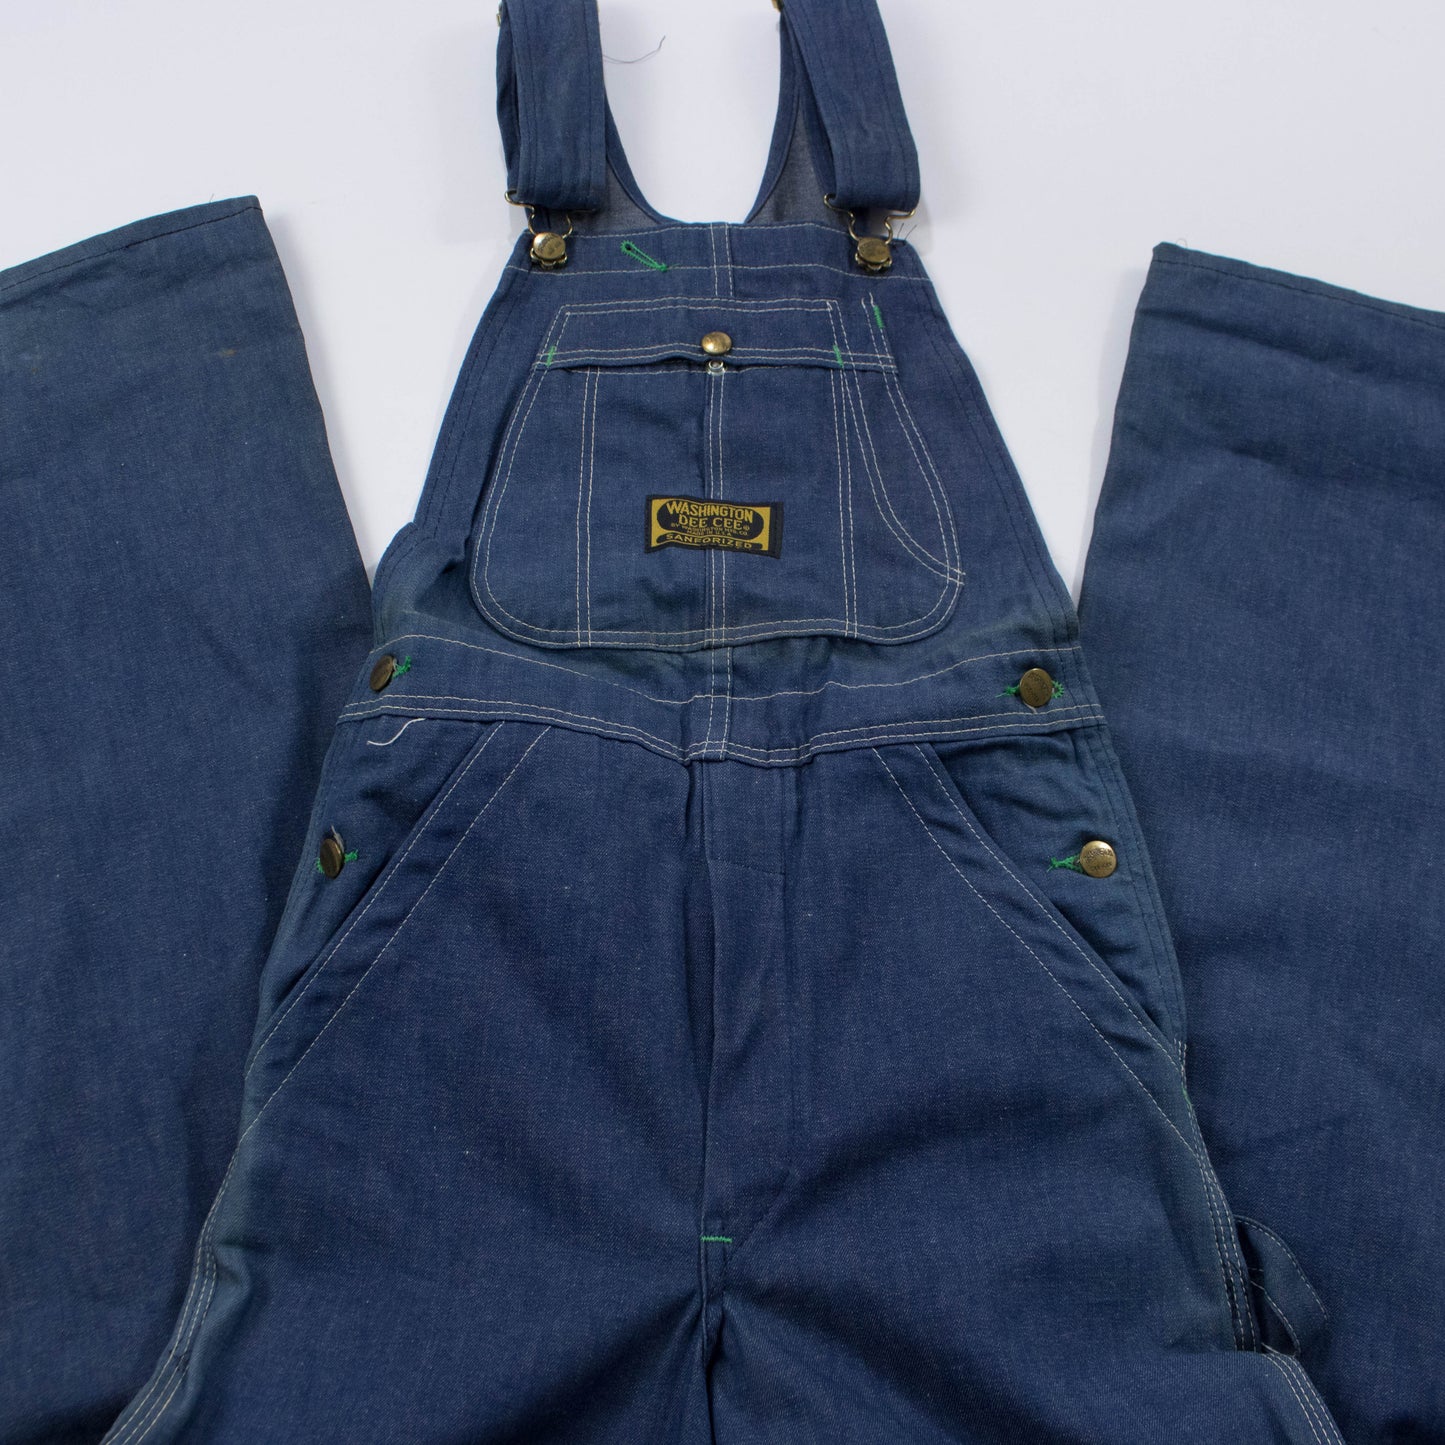 Deadstock Dee Cee Sz 25 Overalls with Paper Tags